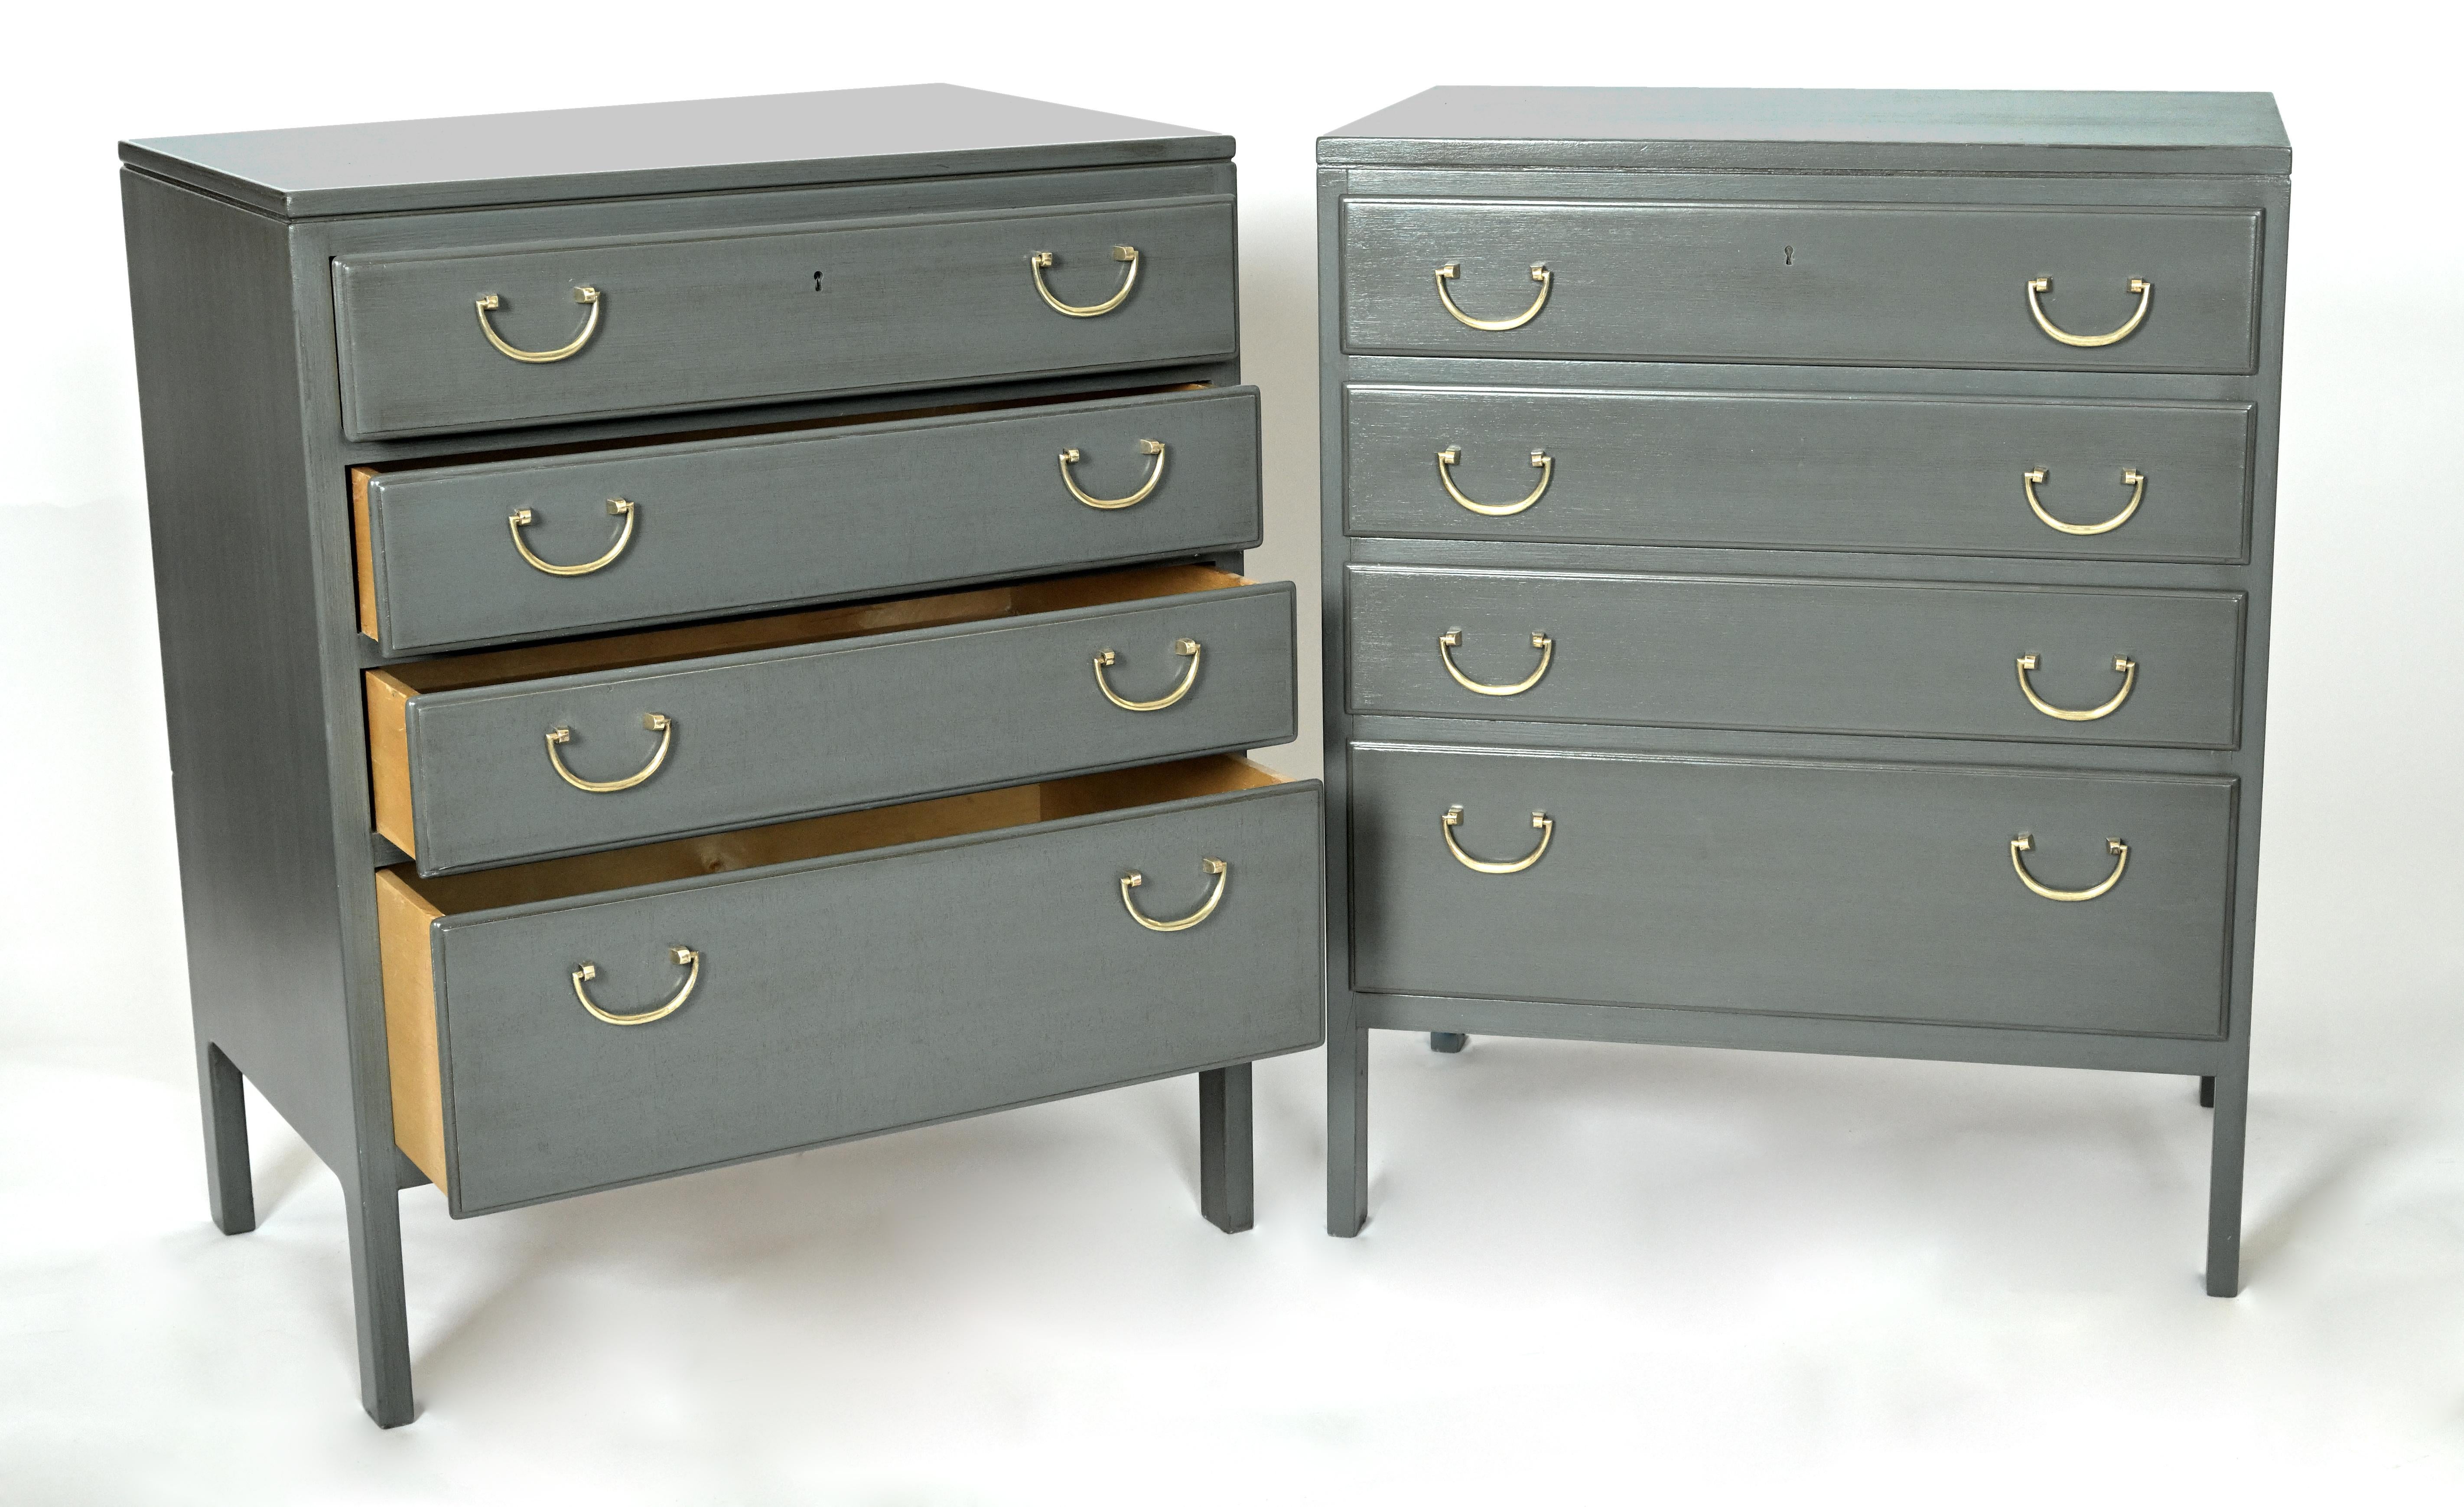 European Pair of Four Drawer Painted Mahogany Chests Designed by David Rosen for NK